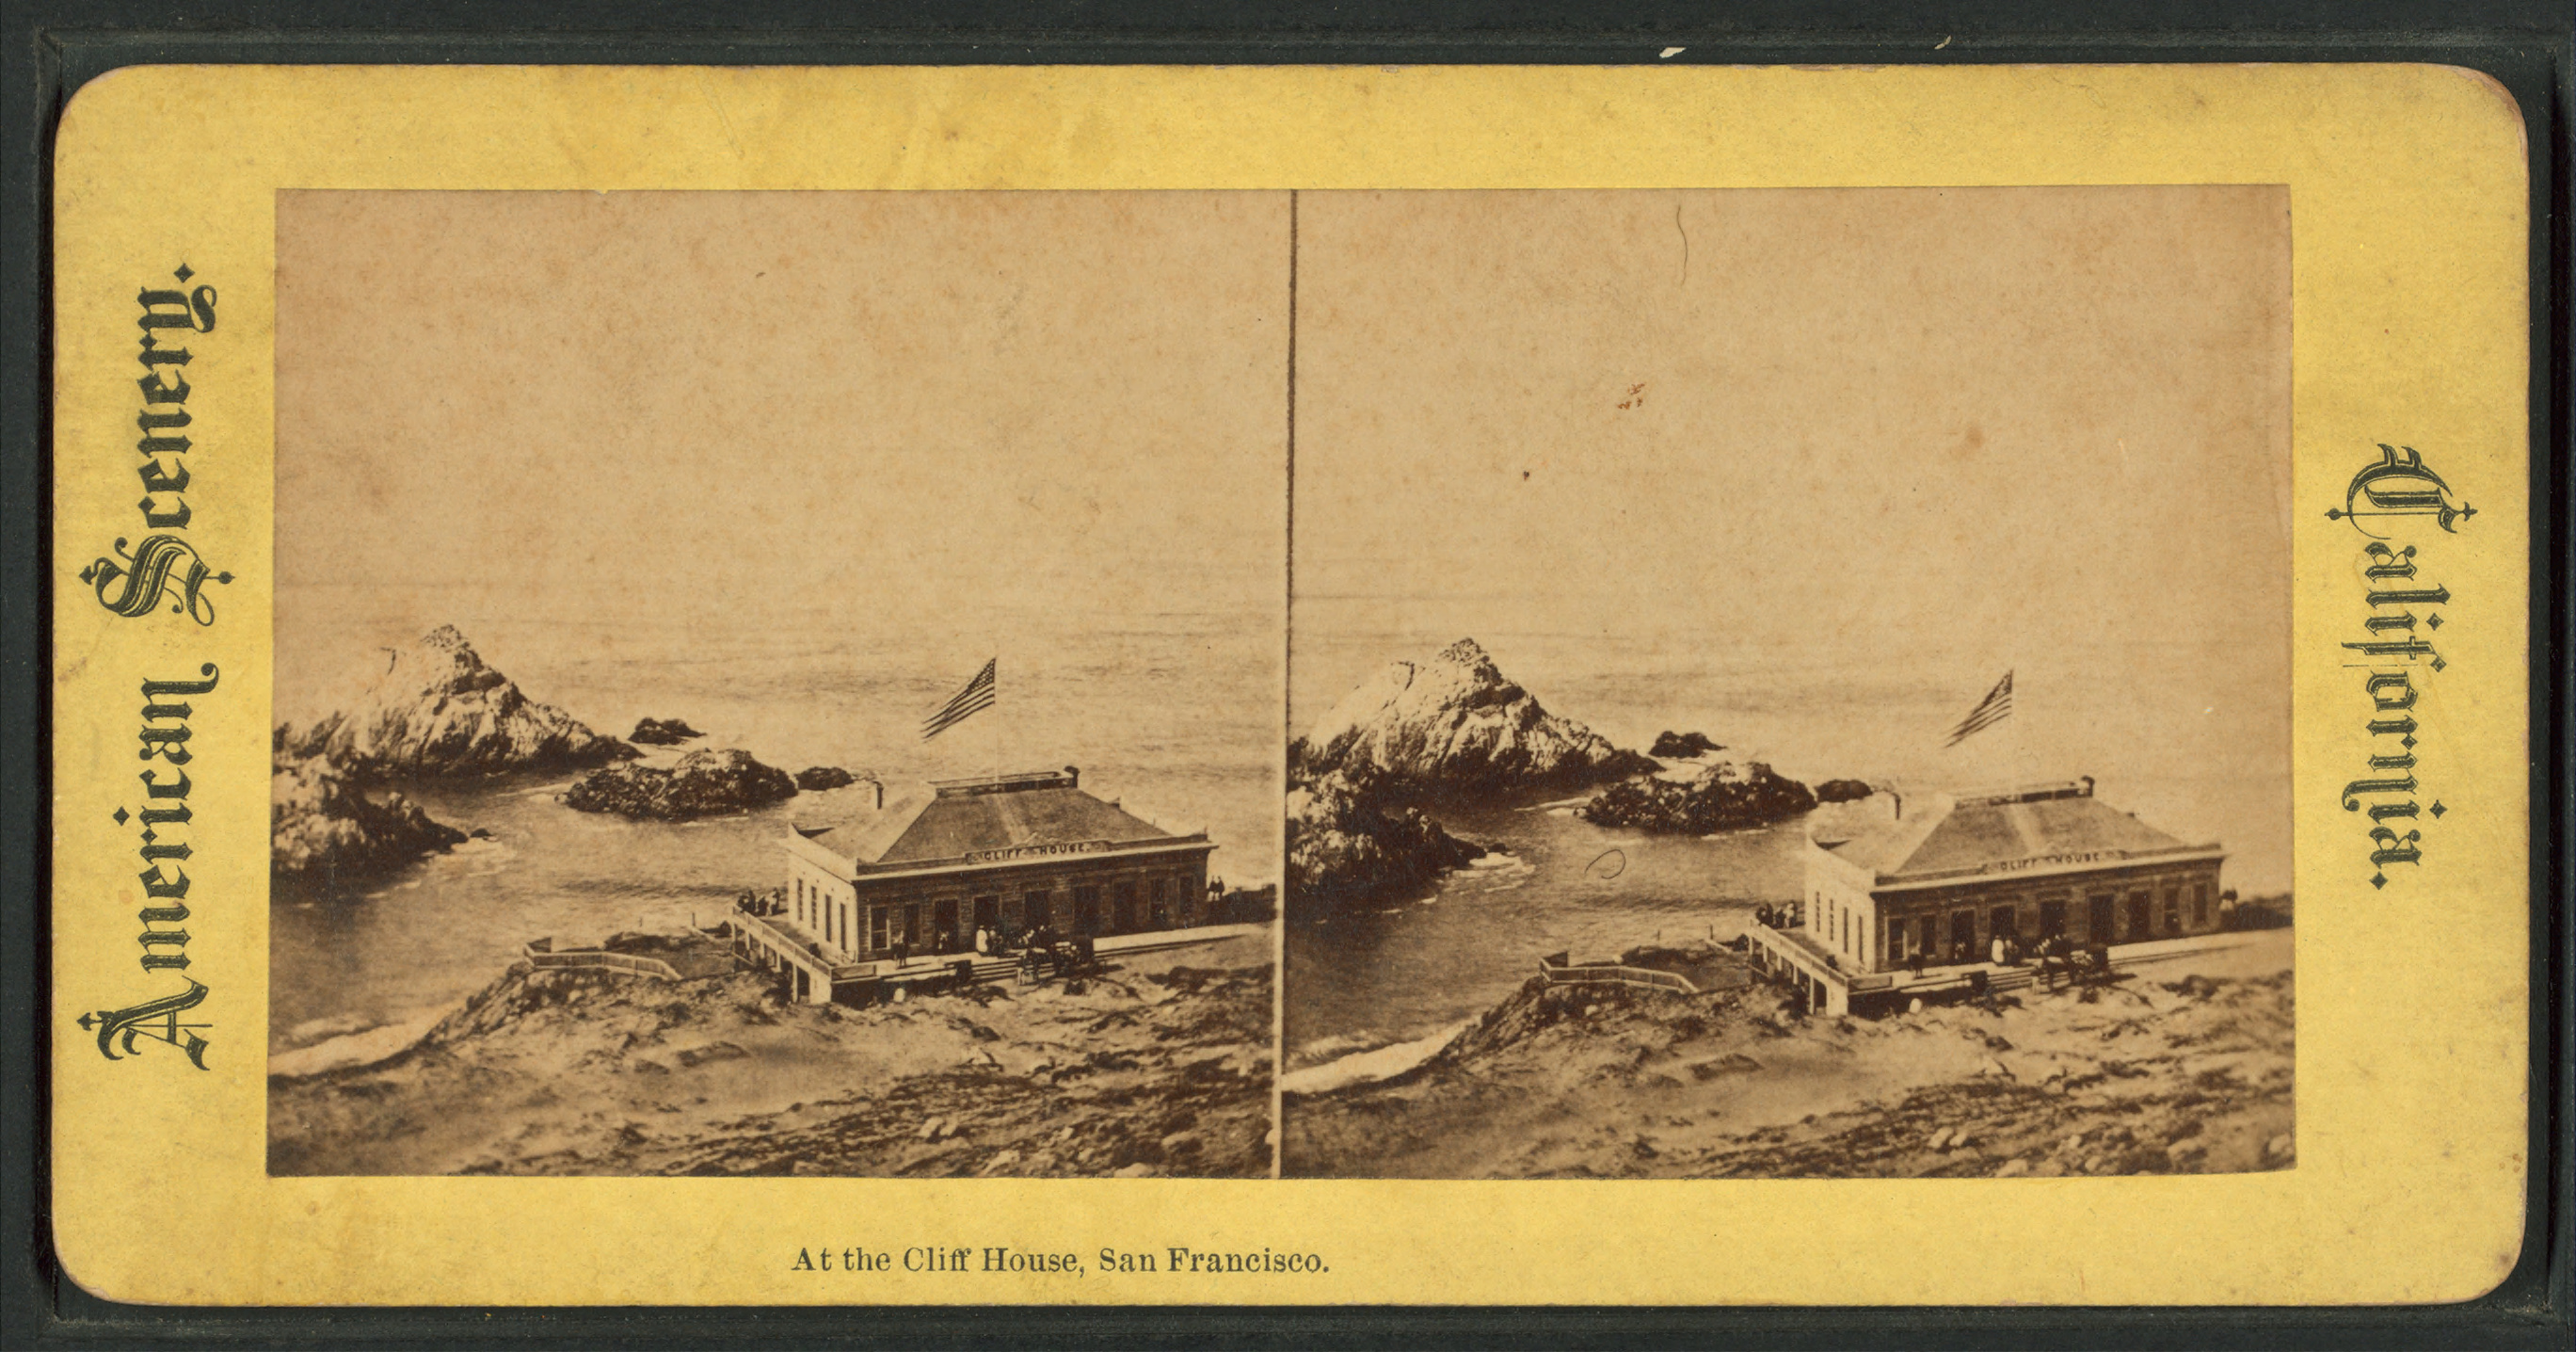 At the Cliff House, San Francisco, from Robert N. Dennis collection of stereoscopic views 2